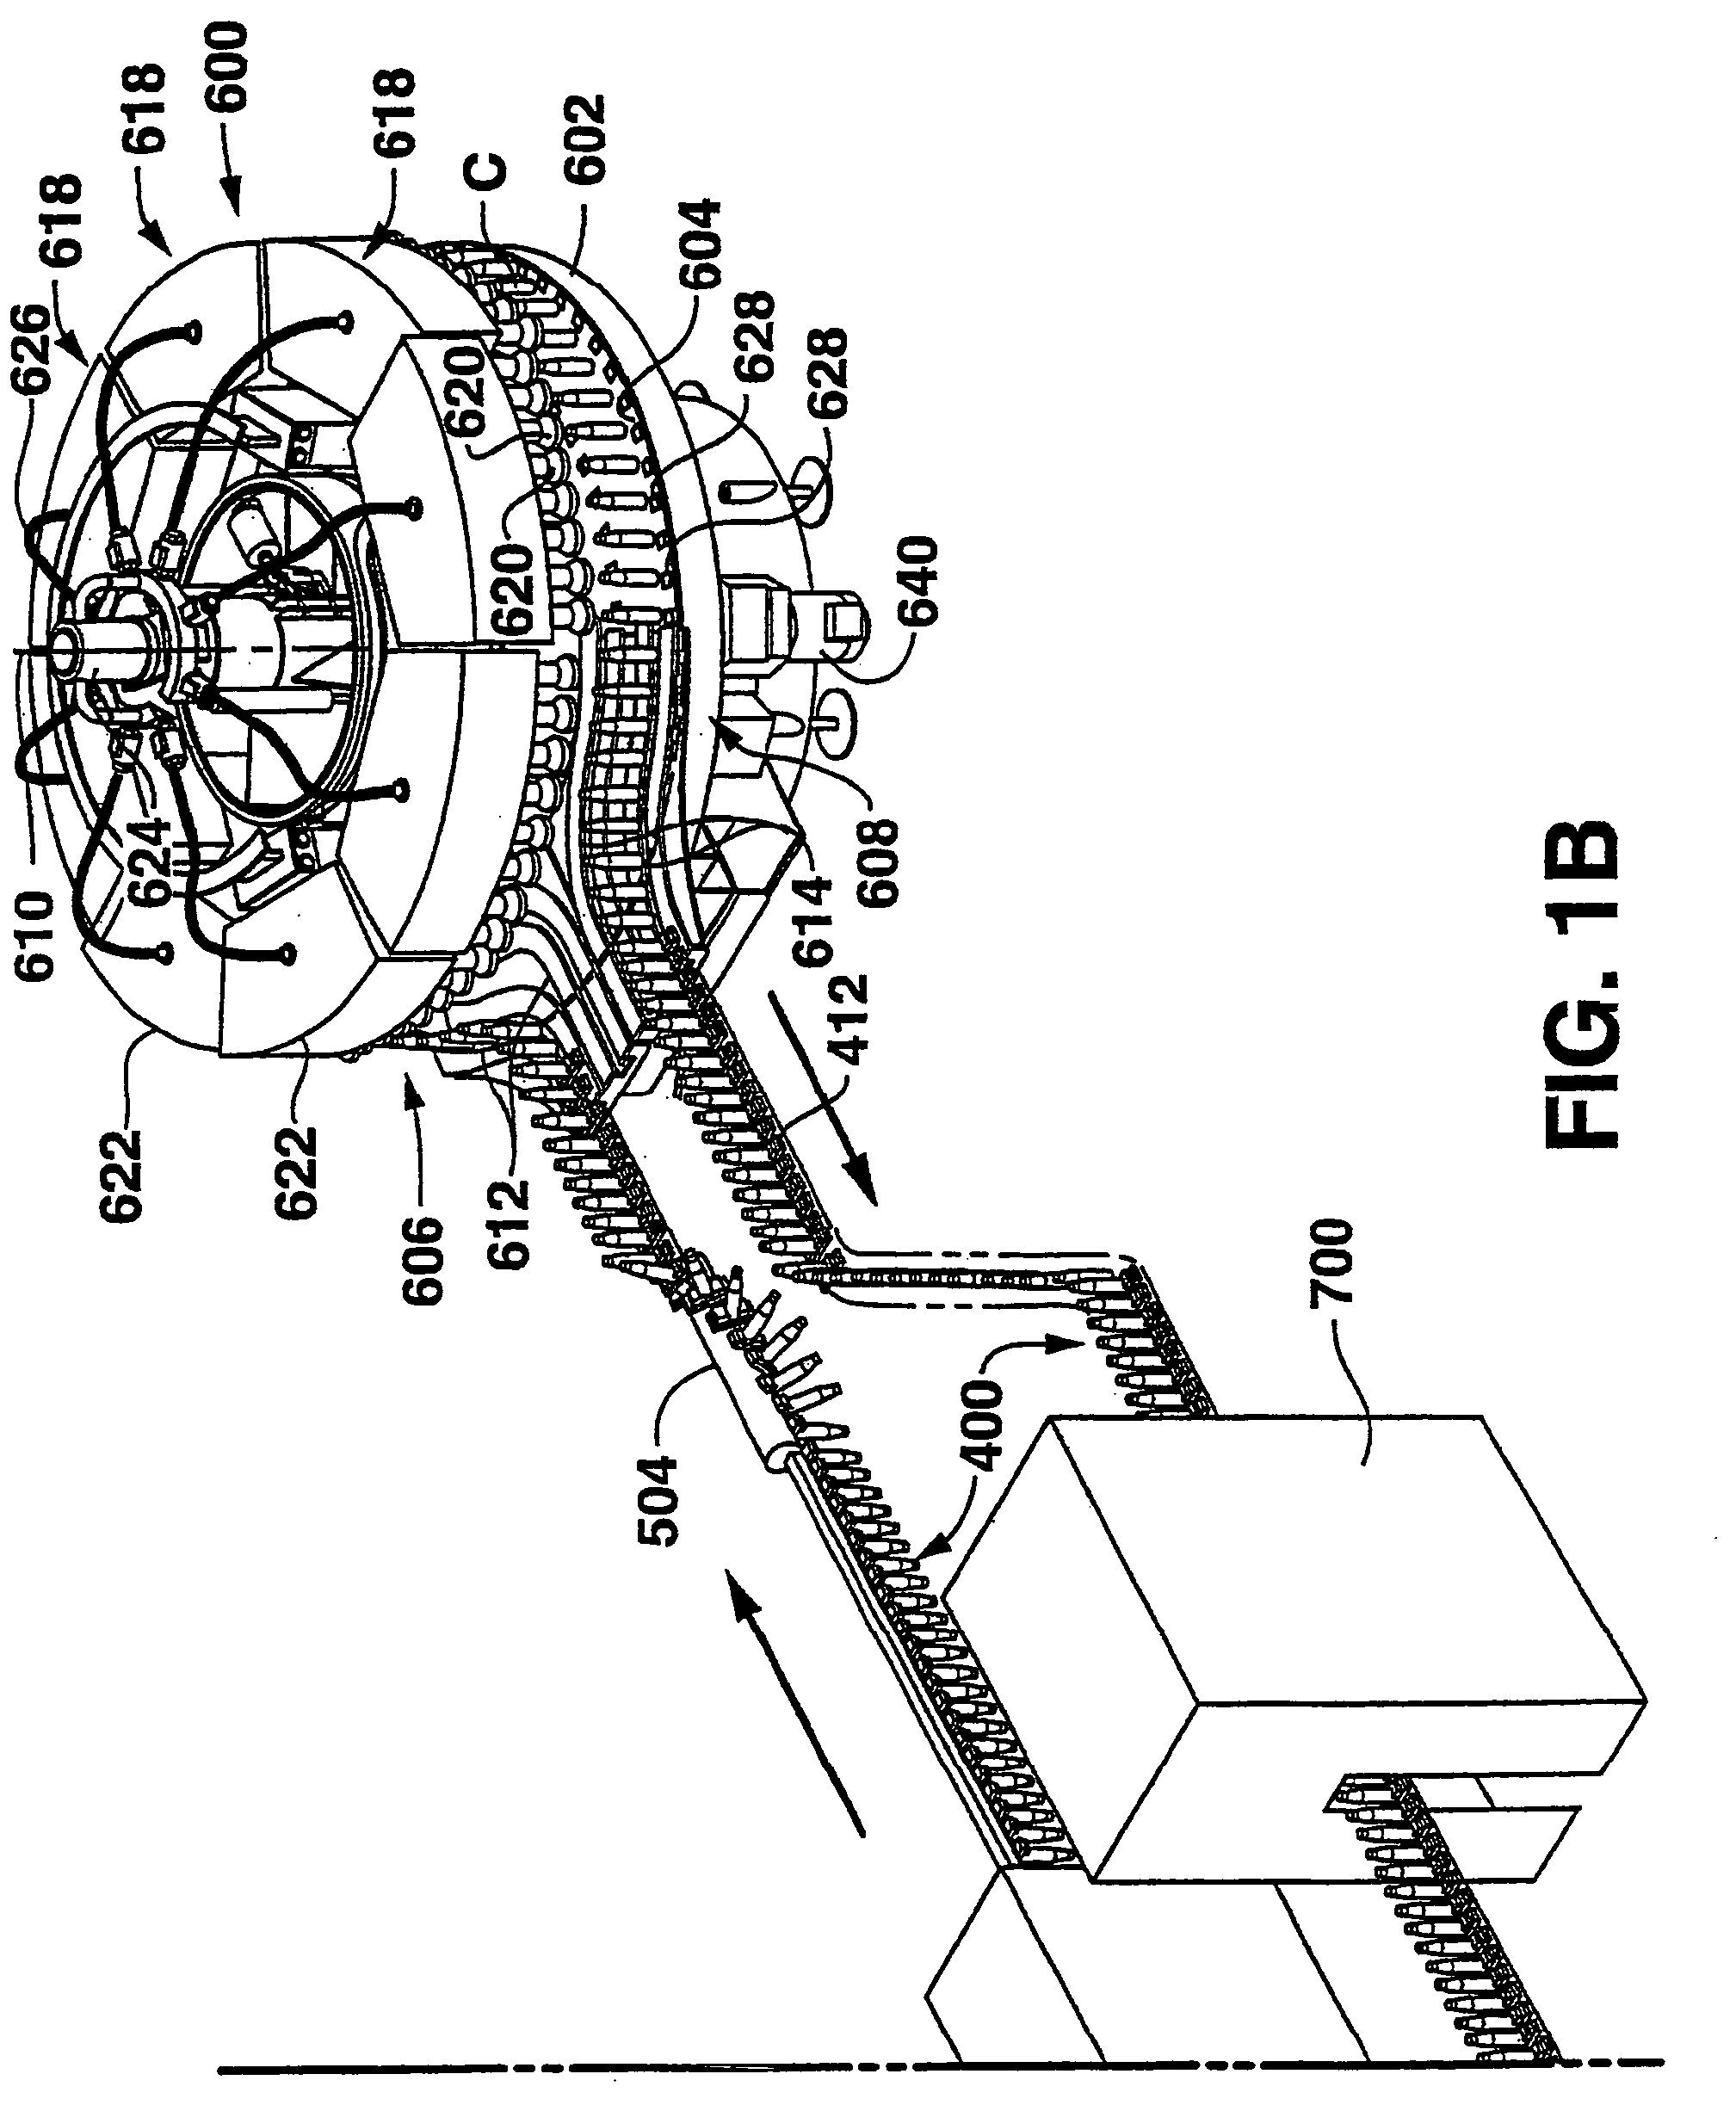 Rotary filling machine and related components, and related method